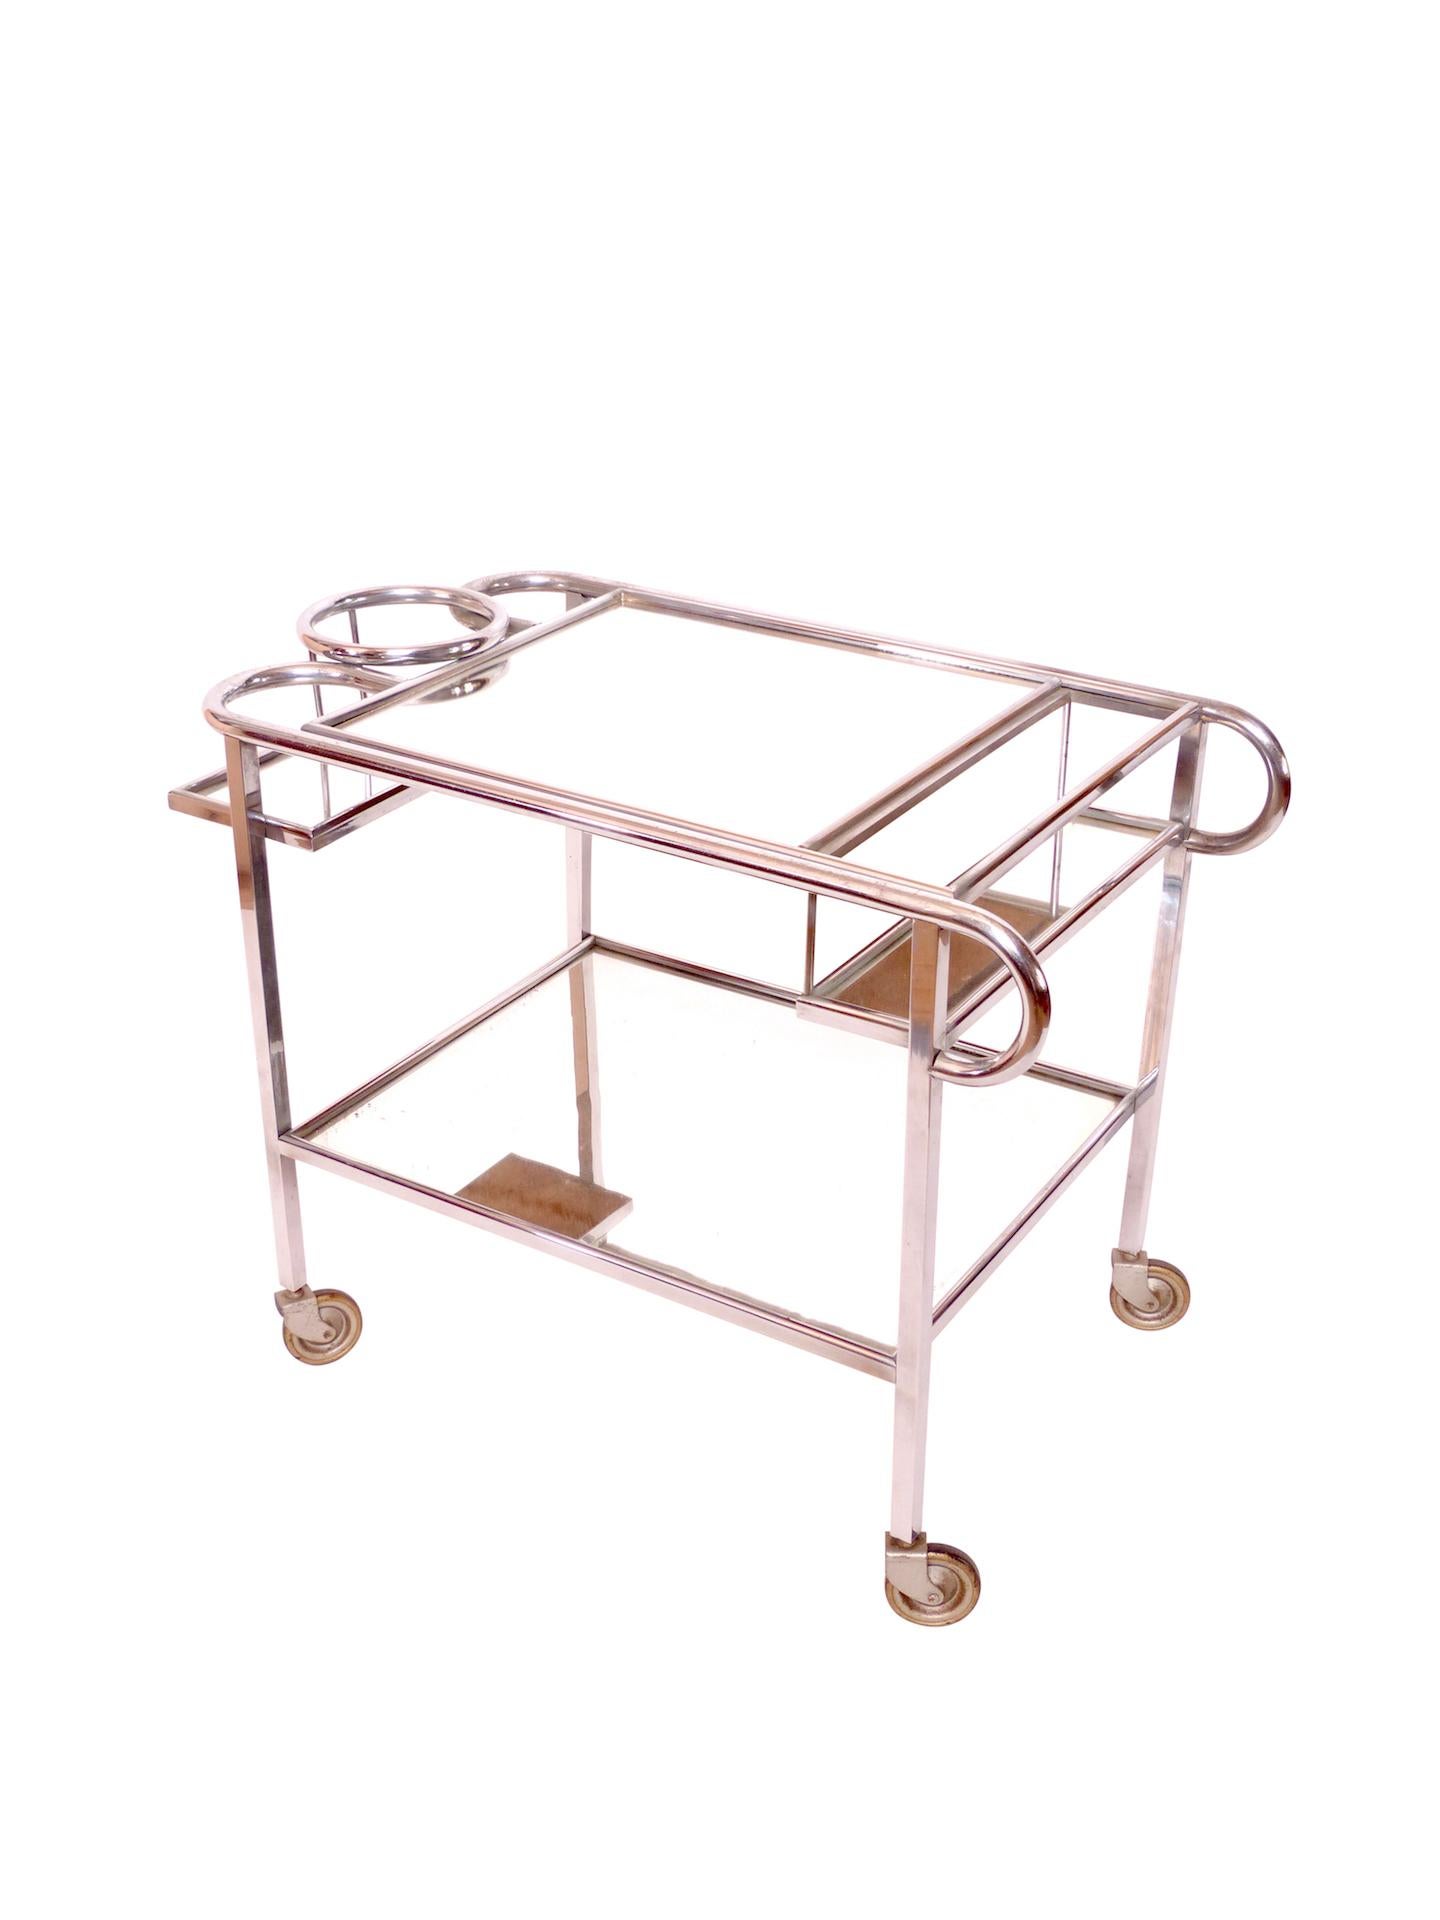 Art Deco Bar Trolley / Tea Wagon
Fresh nickeled / chromed  
Original Mirrors 
French Art Deco, 1930s 

Pictures take in a warm lighted ambience. 
Surface is chromed! 